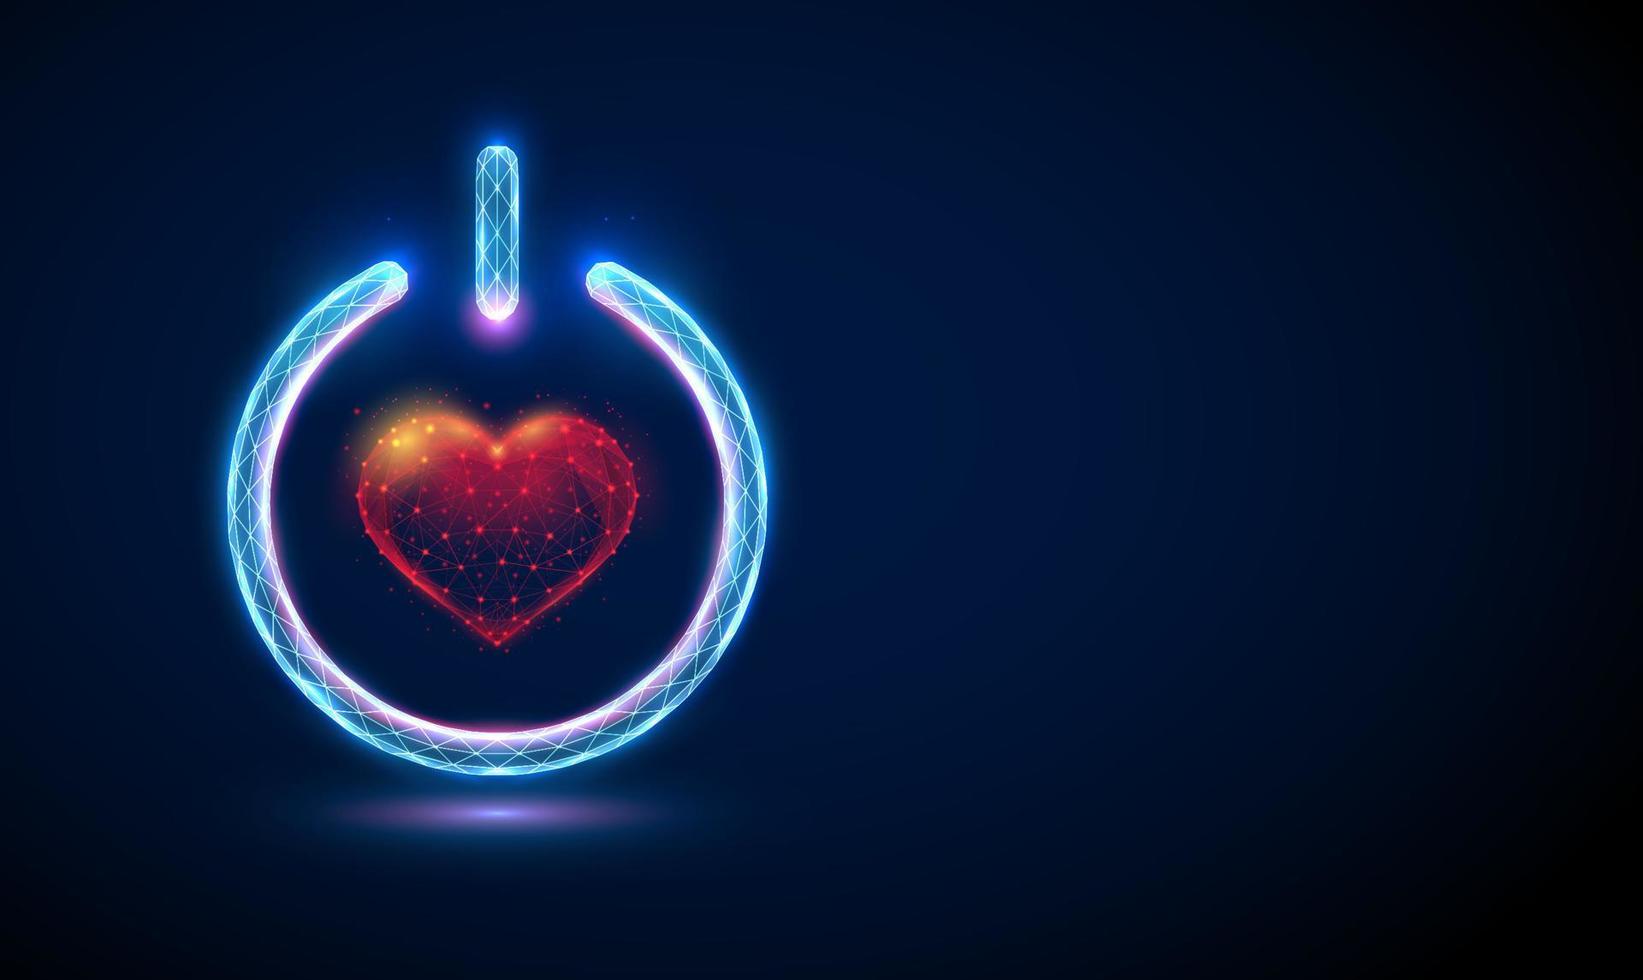 Abstract red heart shape in power button vector